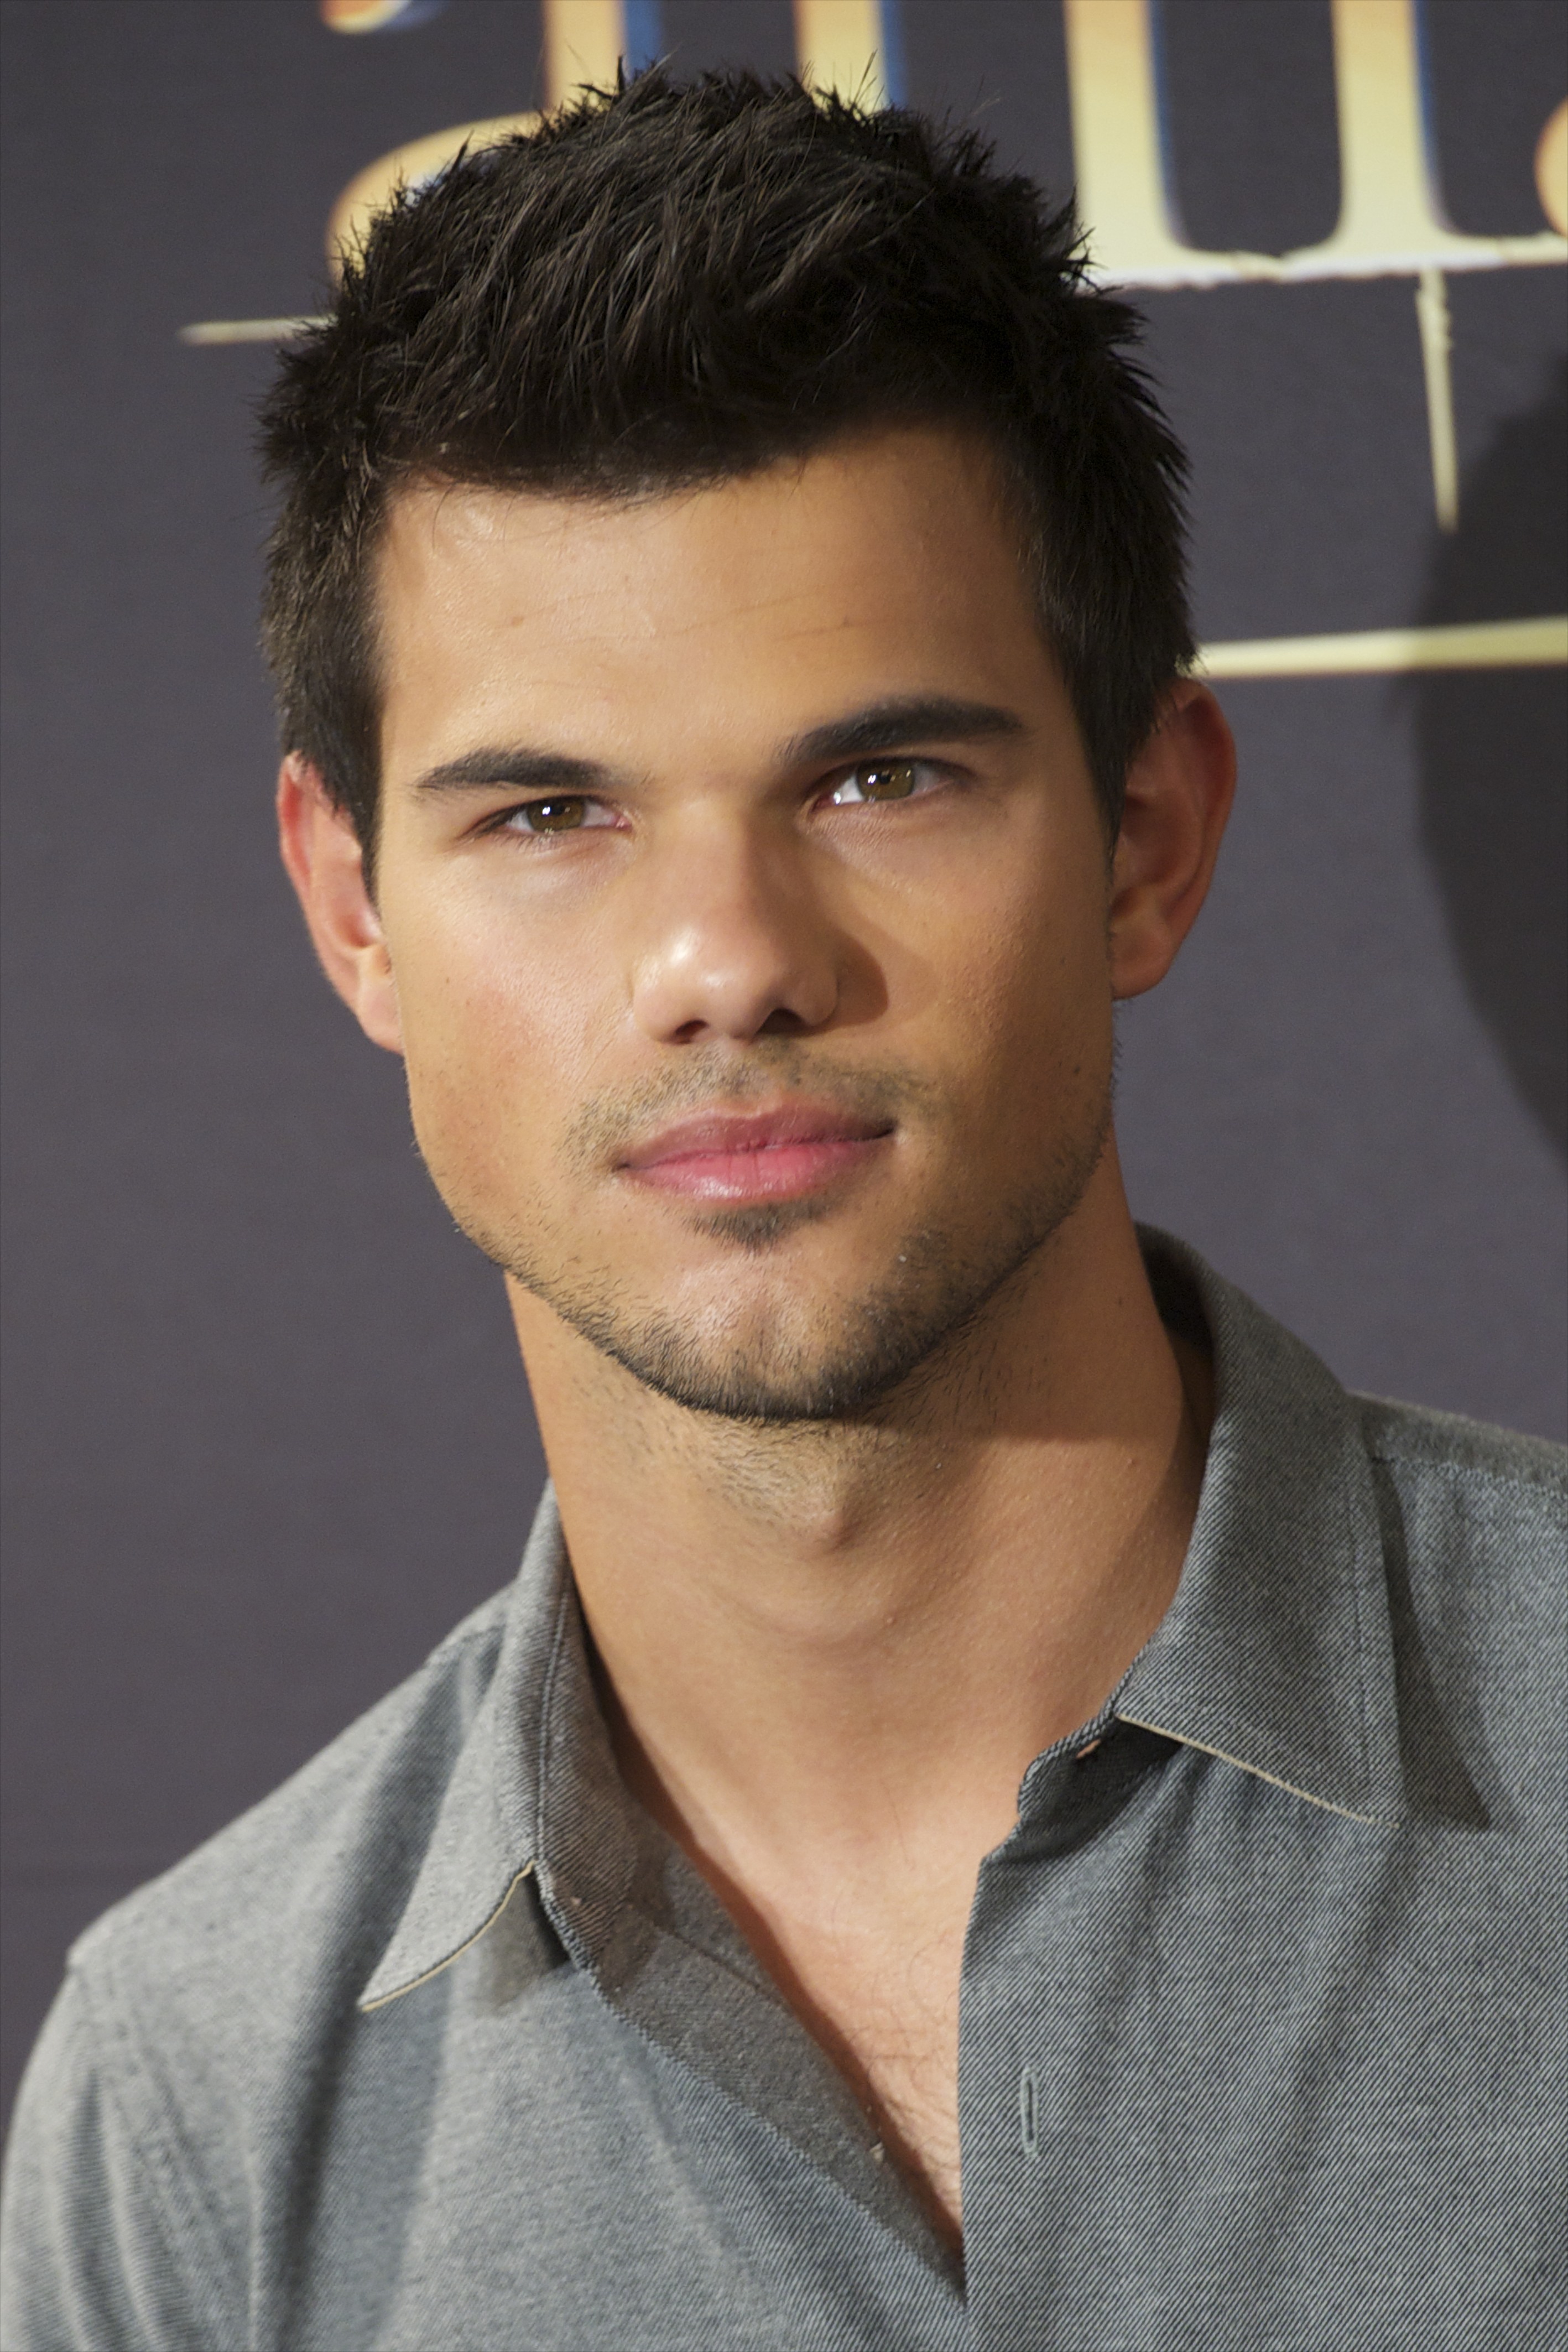 Images of Taylor Lautner | 2835x4252